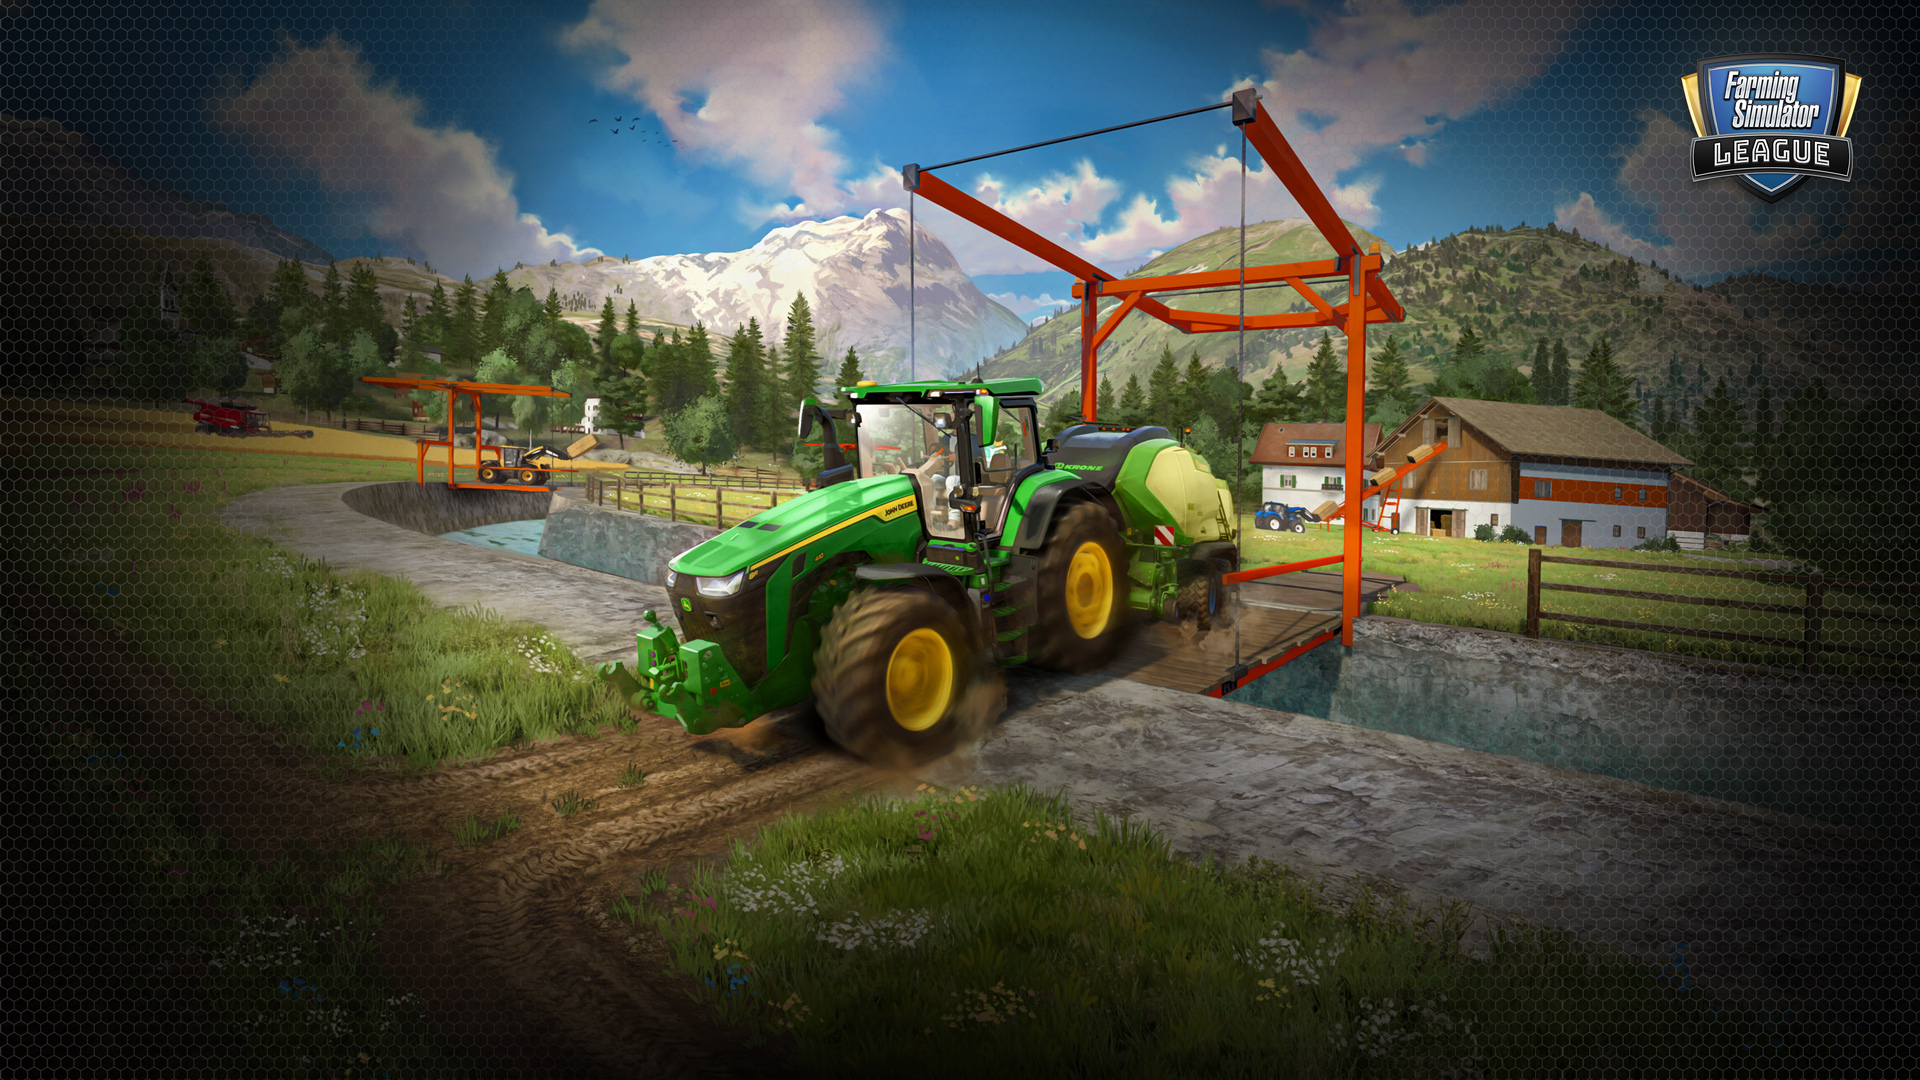 Our guide to watching the Farming Simulator League - Epic Games Store